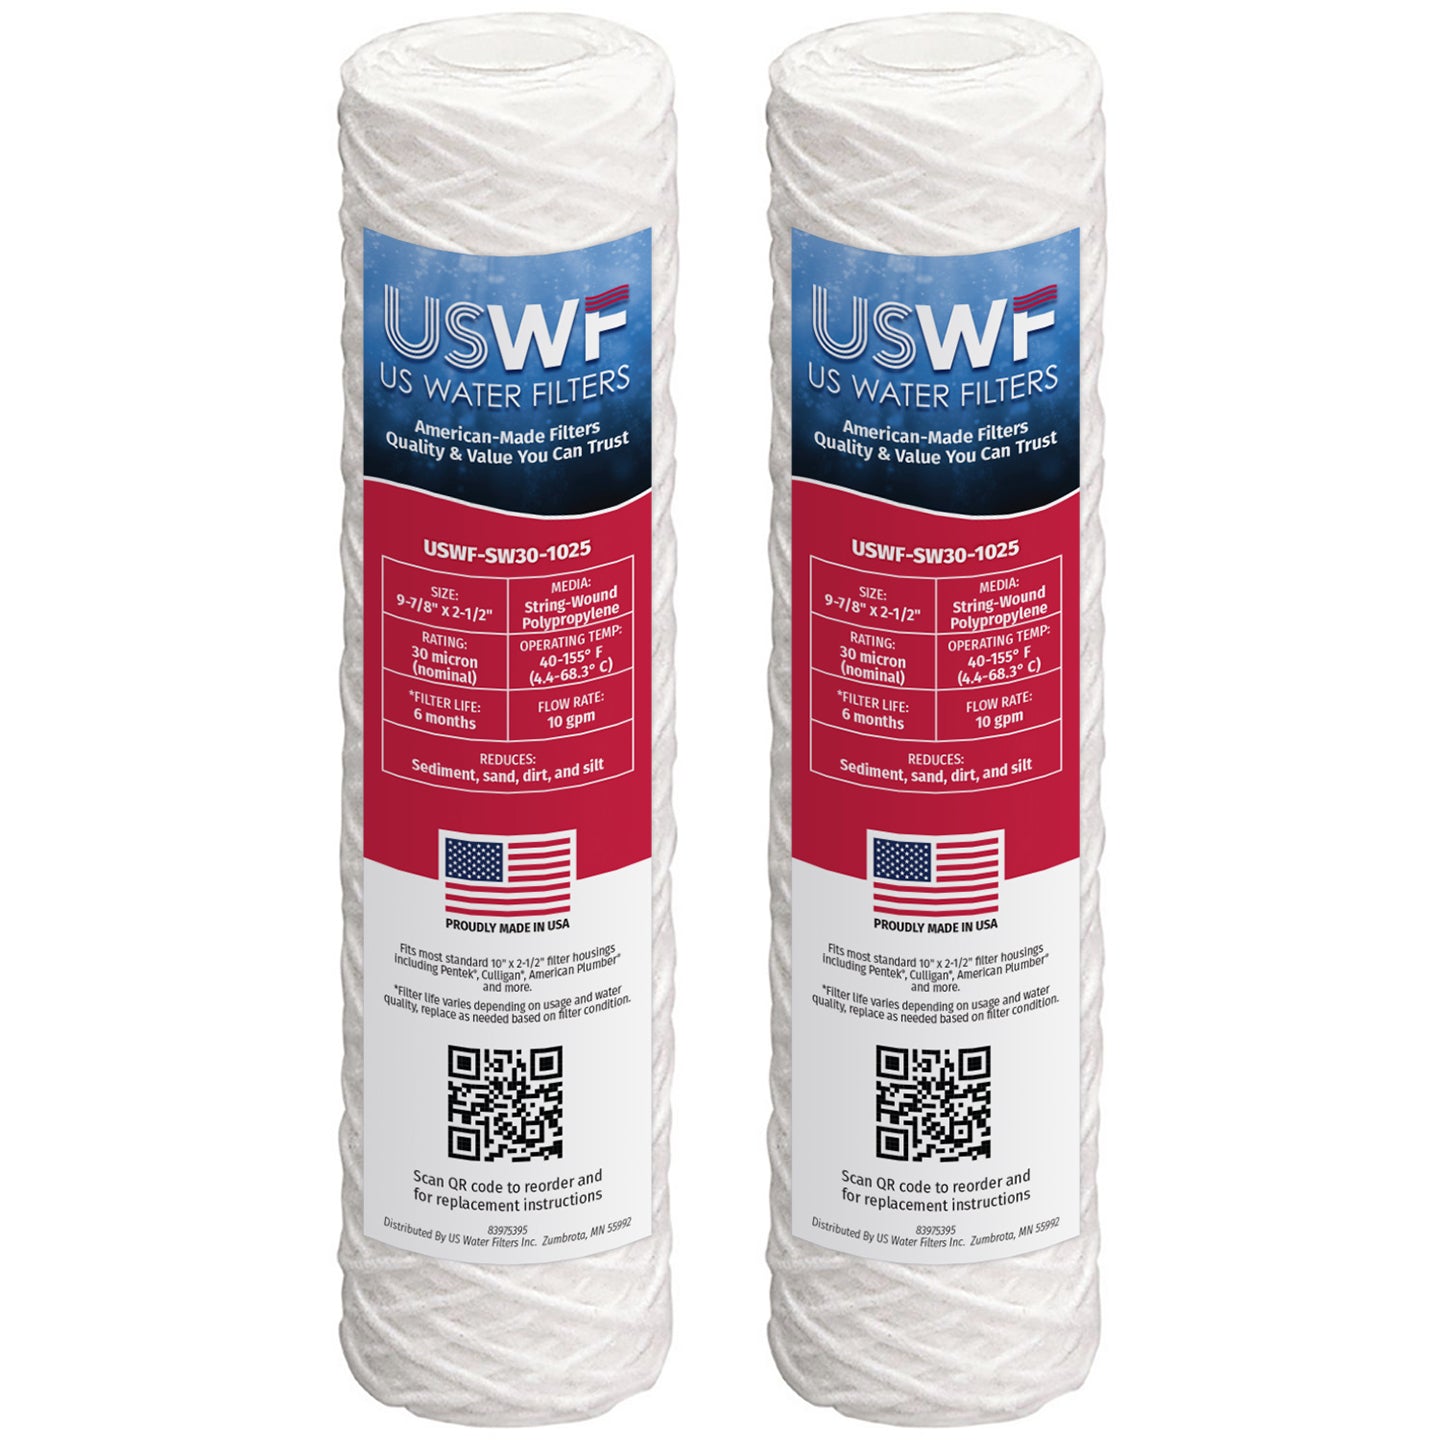 30 Micron String Wound Sediment Filter by USWF 10"x2.5"